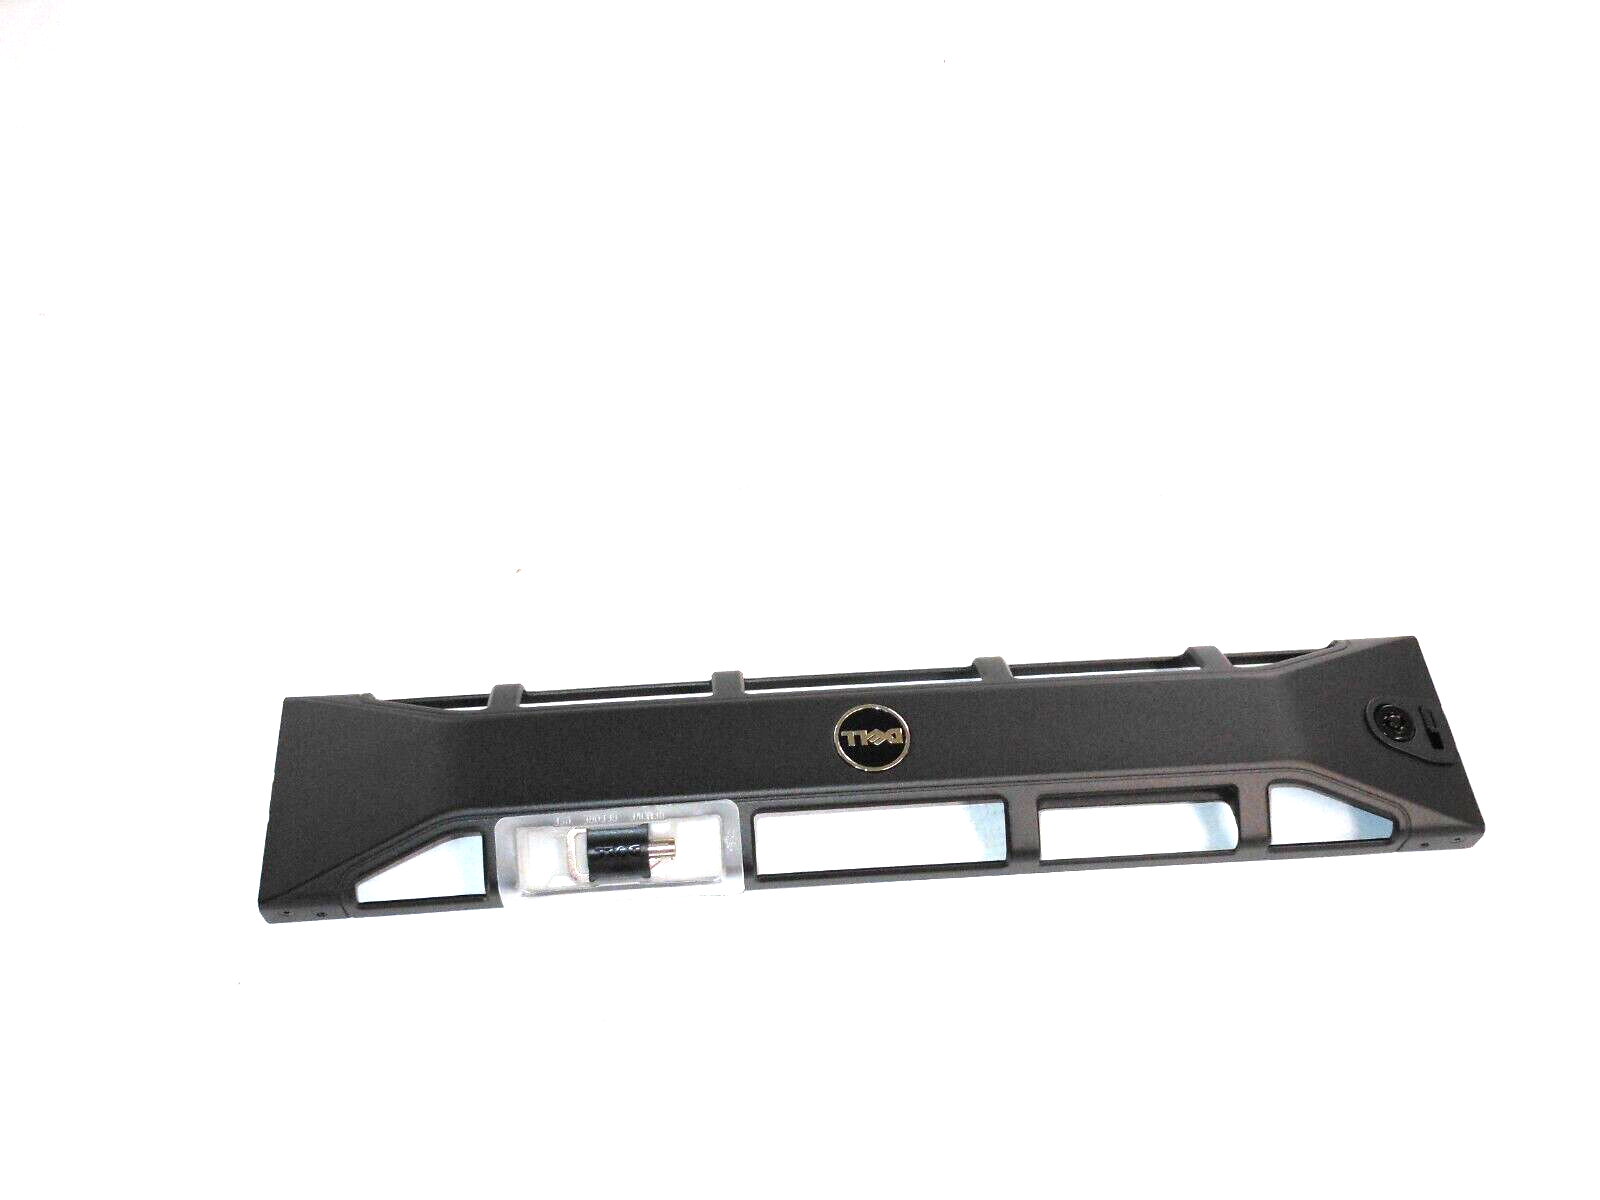 NEW Dell OEM PowerEdge R510 Front Bezel Cover Faceplate Key AMA01 T590P